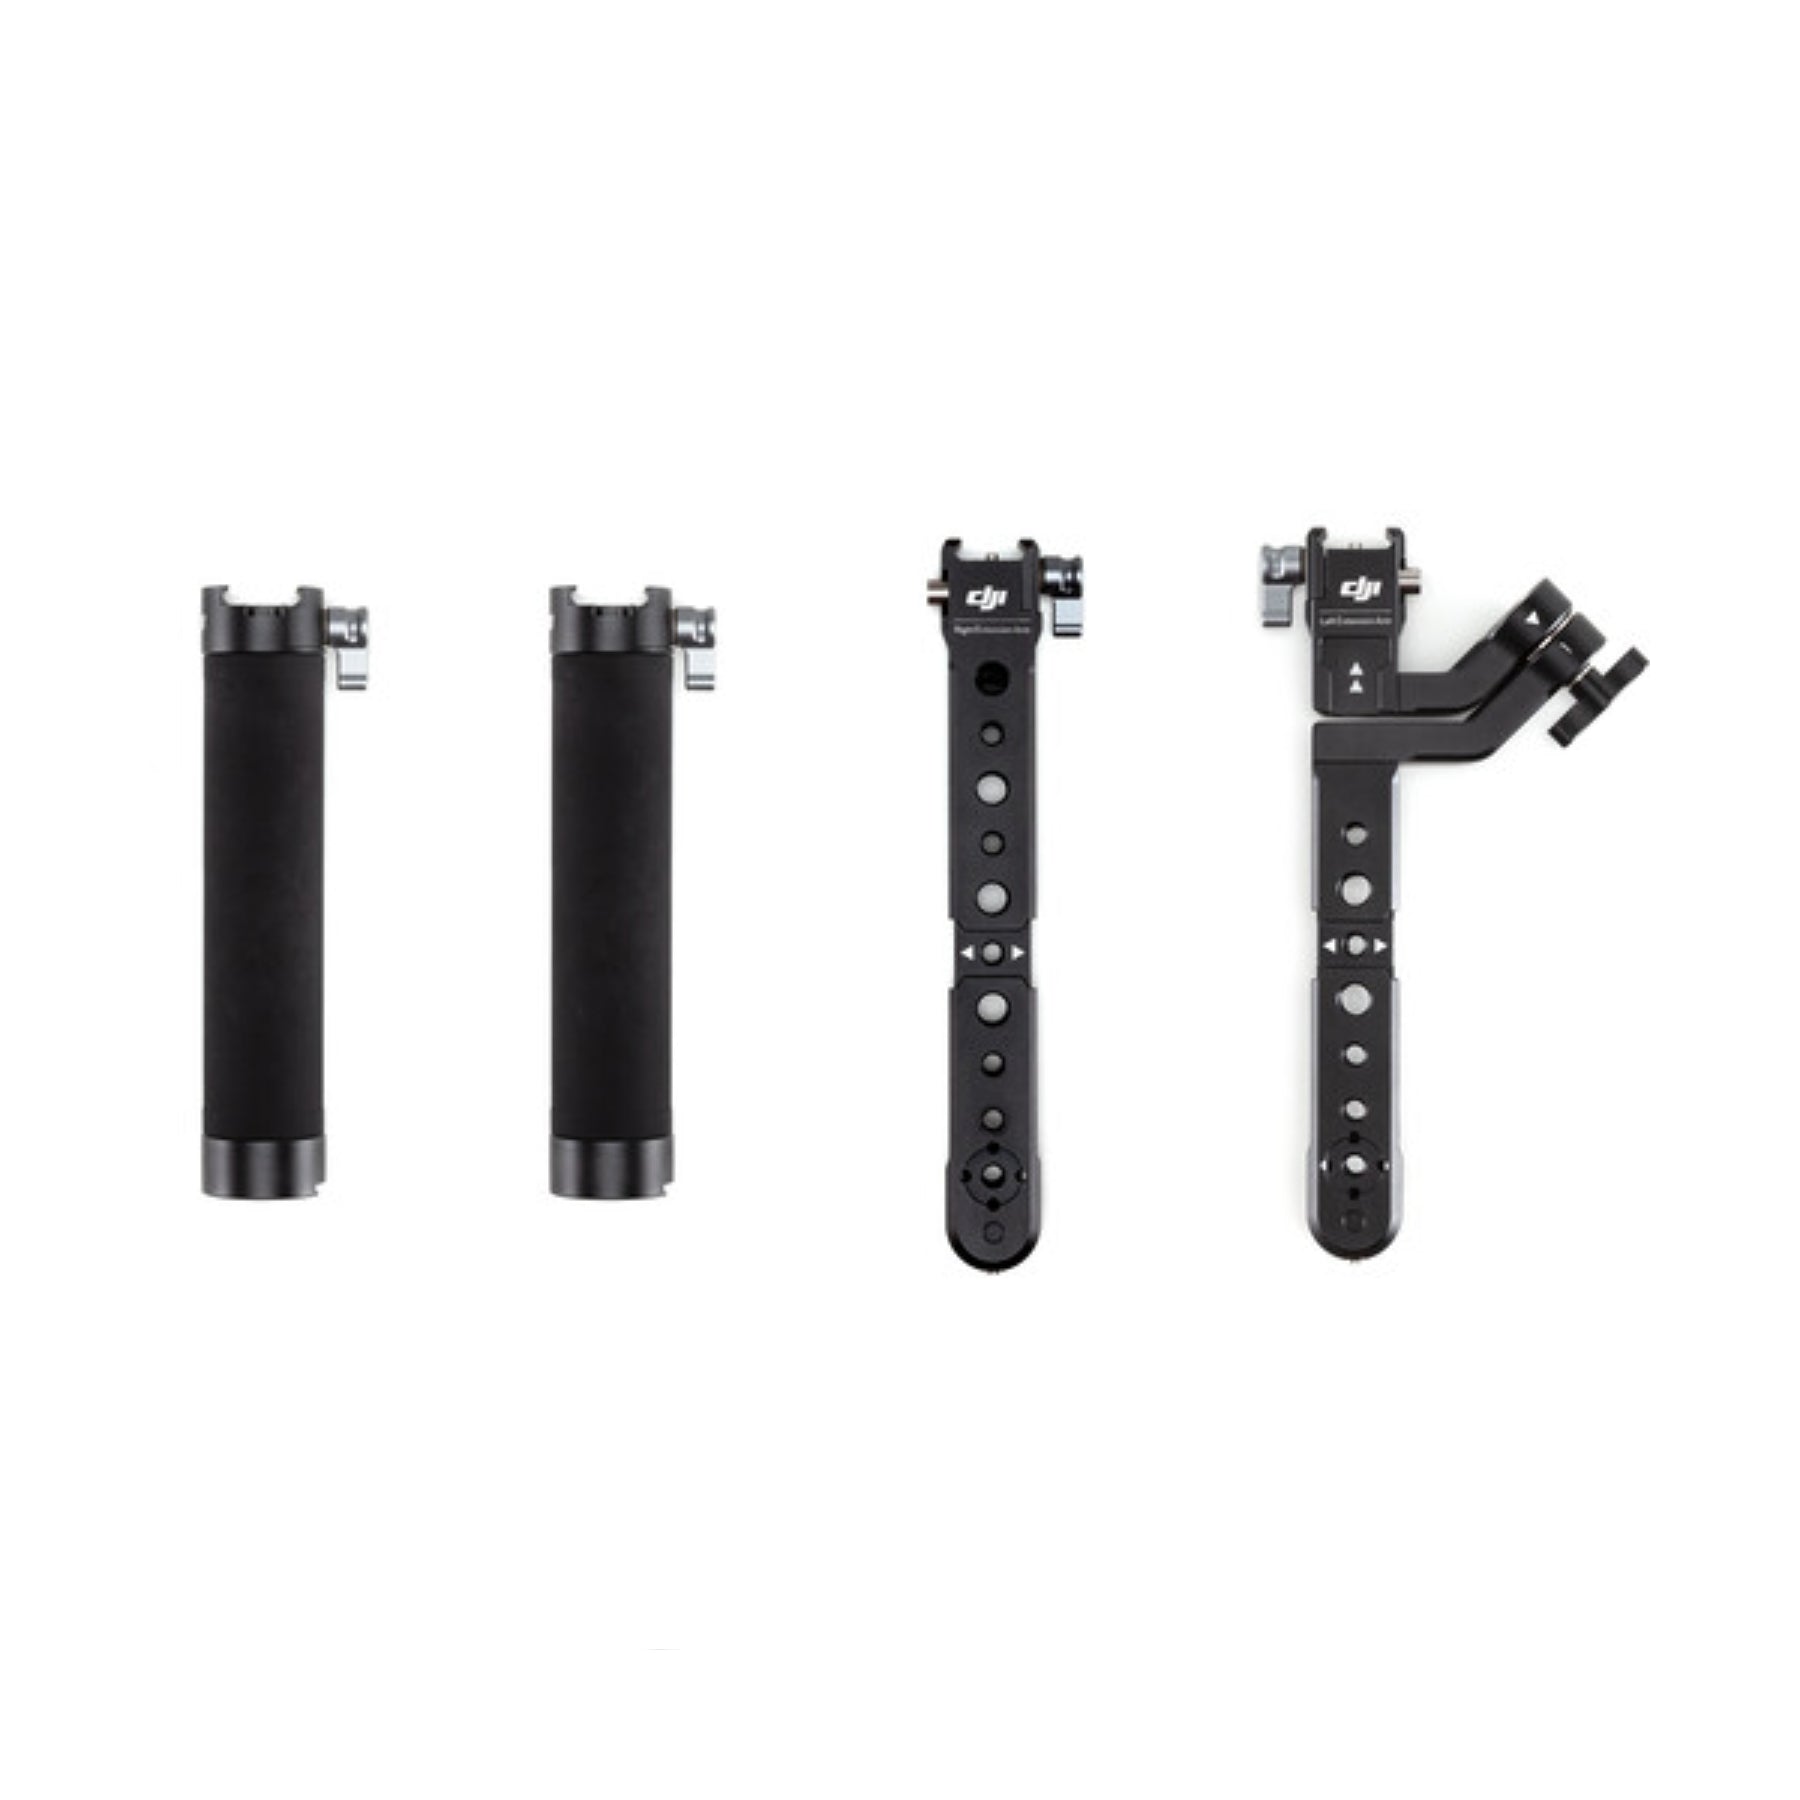 DJI Twist Grip Dual Handle for Ronin S2 for hire